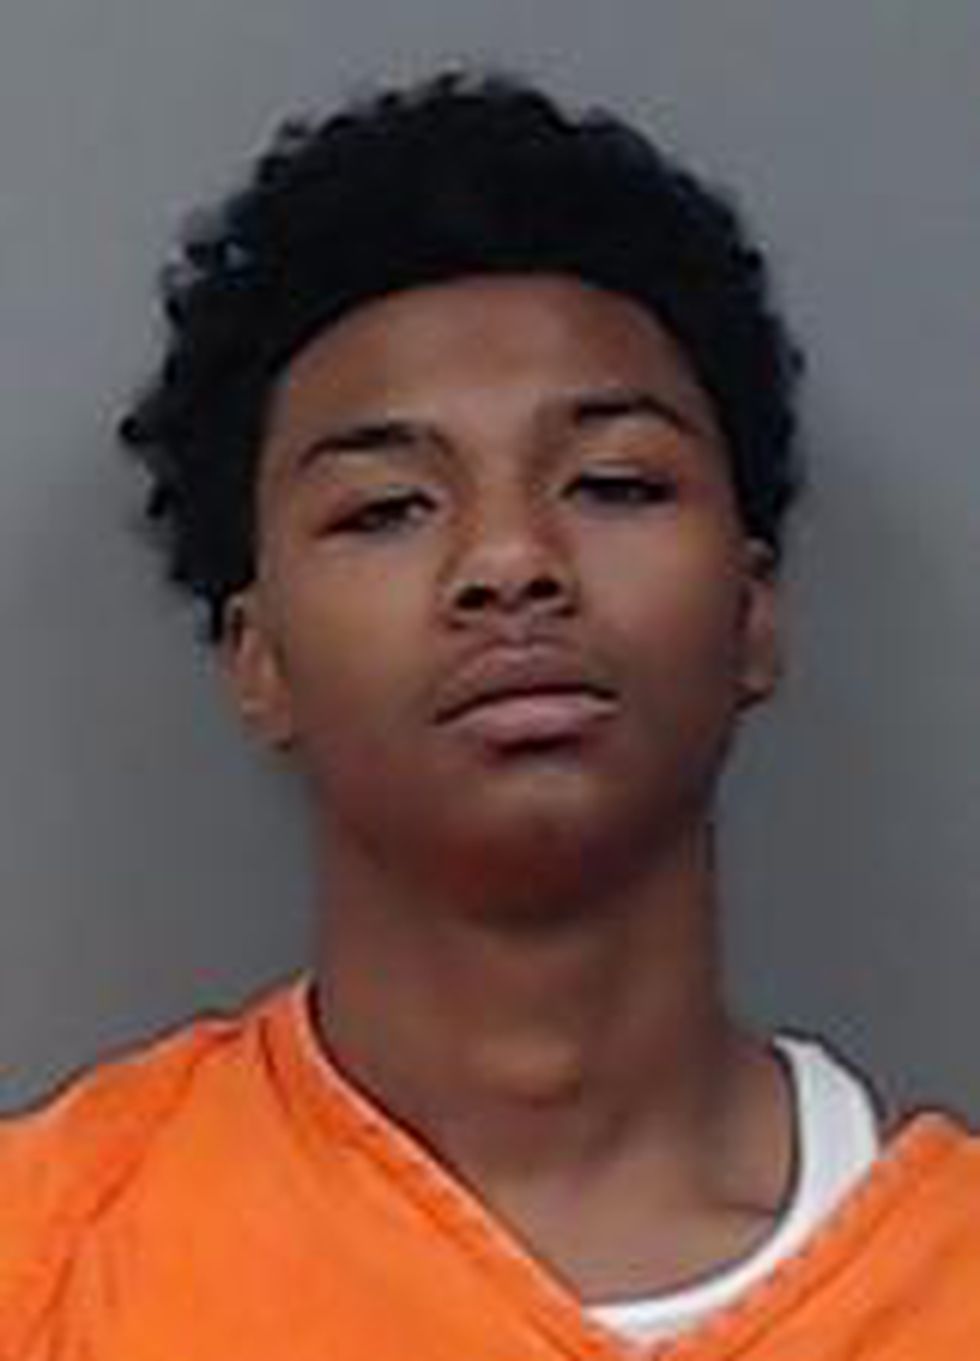 Authorities say Timothy Dwayne Christmas, 18, assaulted a Walmart employee and bite a police...